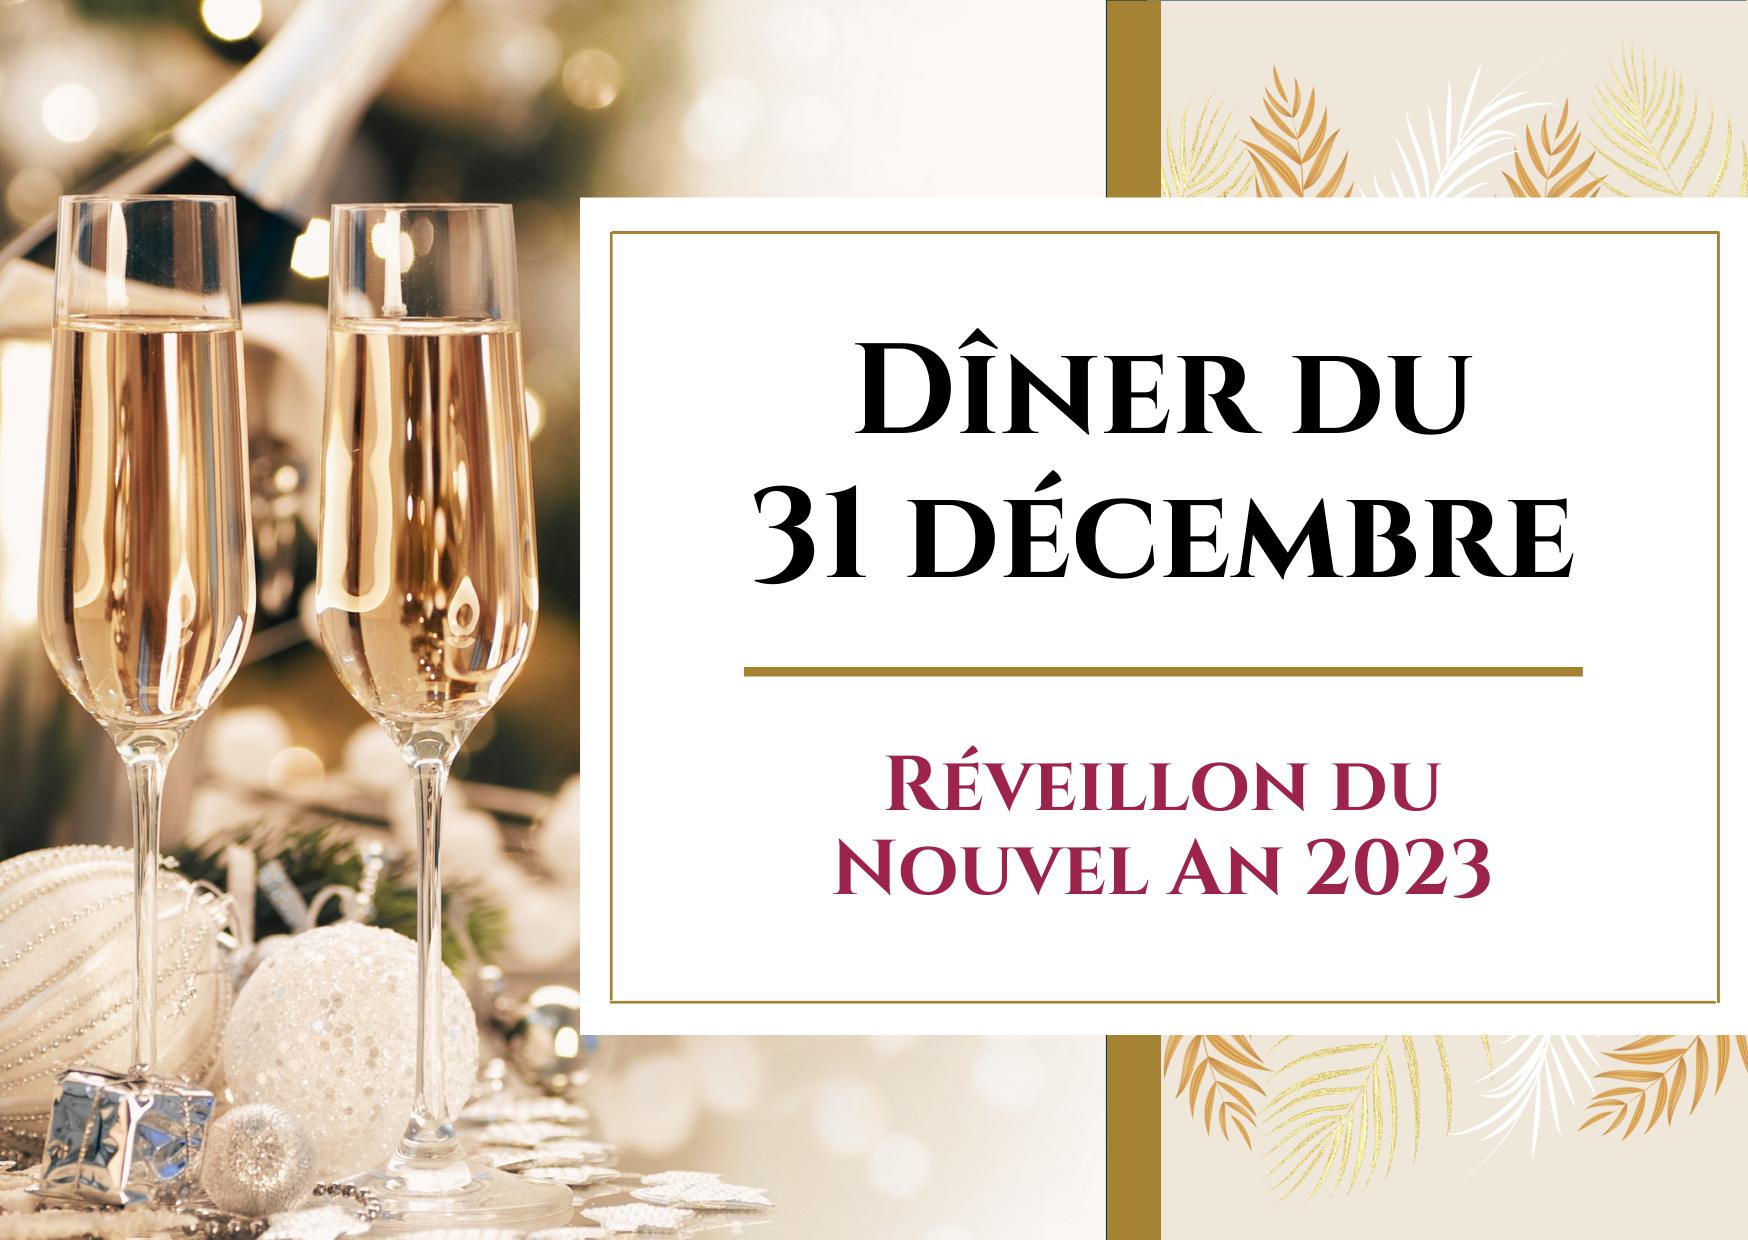 NEW YEAR'S EVE MENU AT VANNES DOWNTOWN